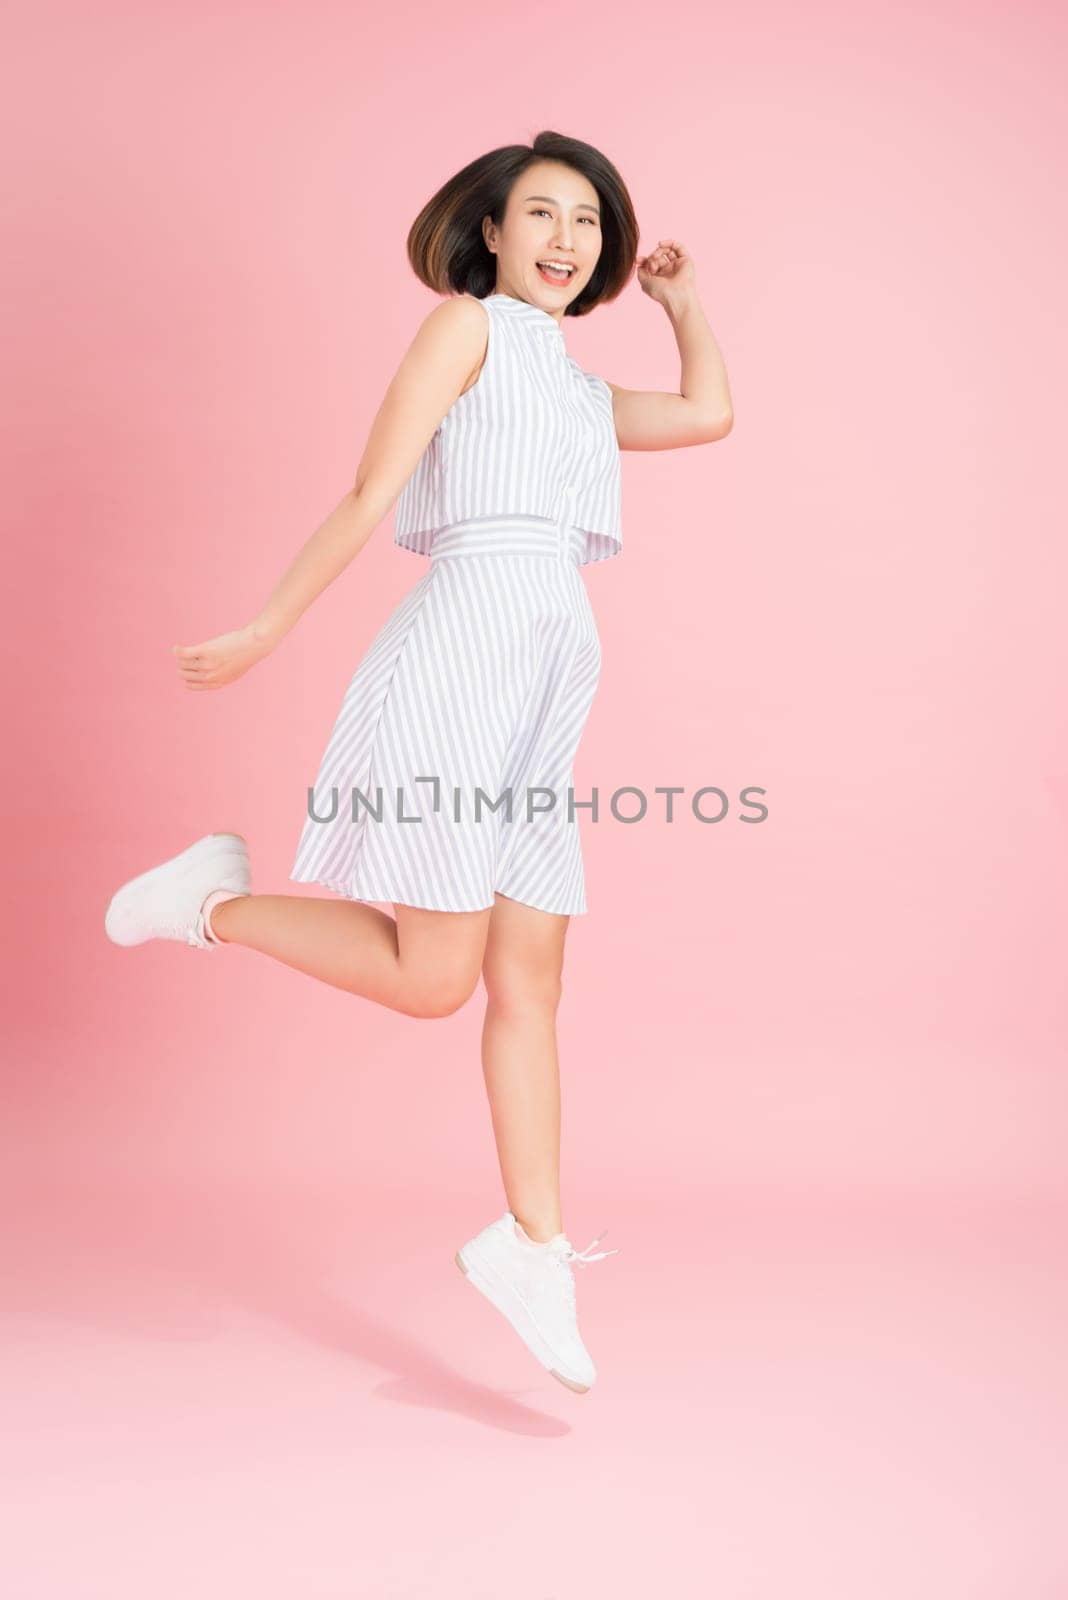 Freedom in moving. Surprised, pretty, happy young woman jumping and gesturing against pink studio background by makidotvn